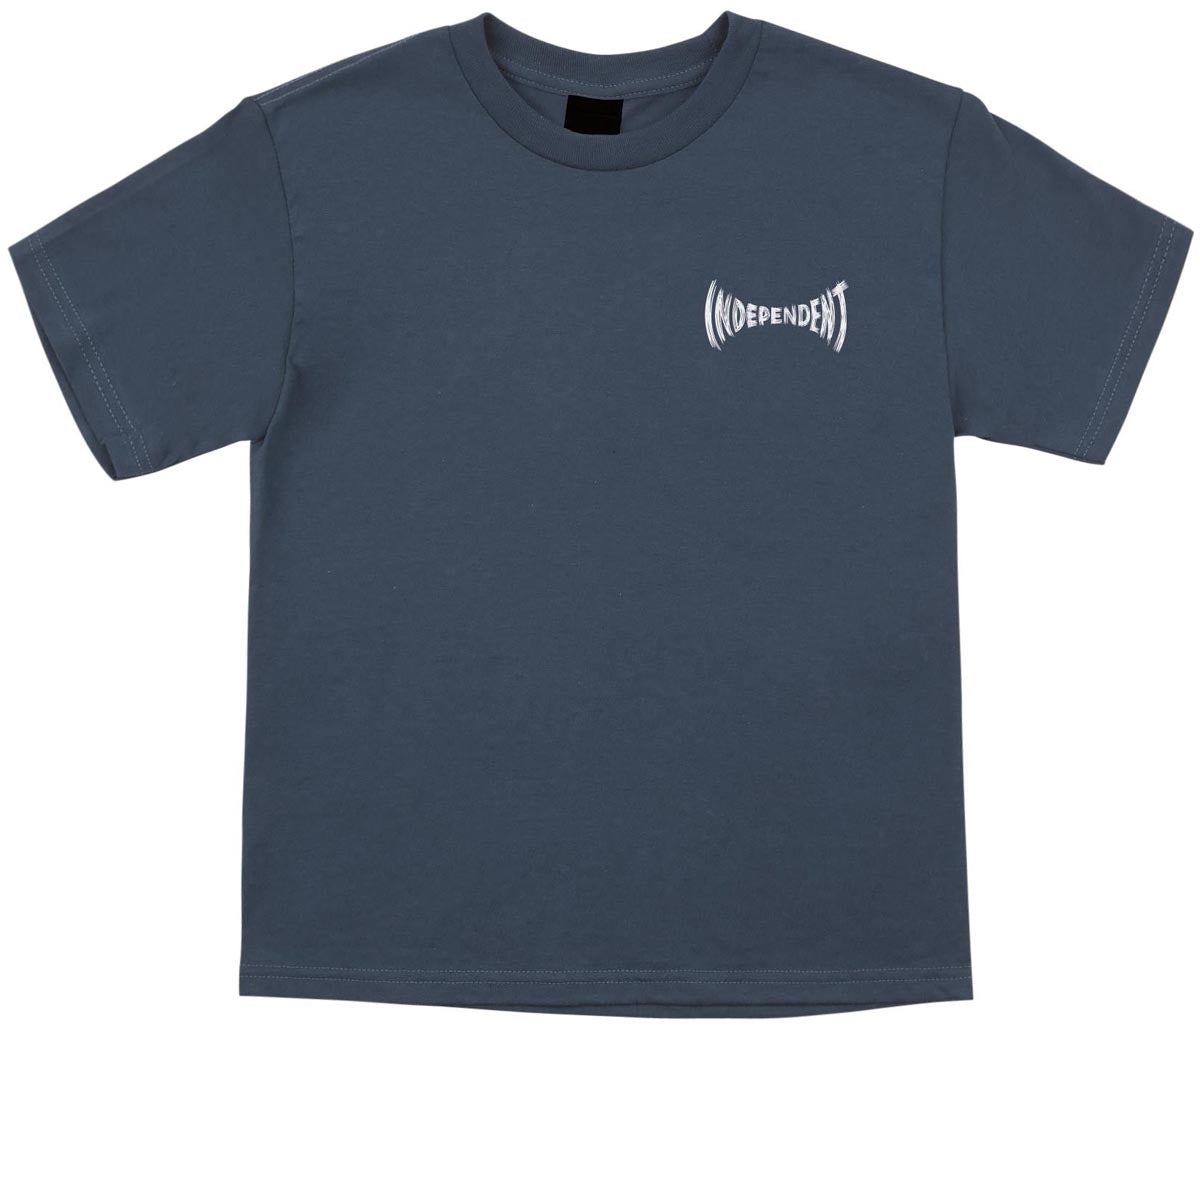 Independent Youth Carved Span T-Shirt - Steel Blue image 2